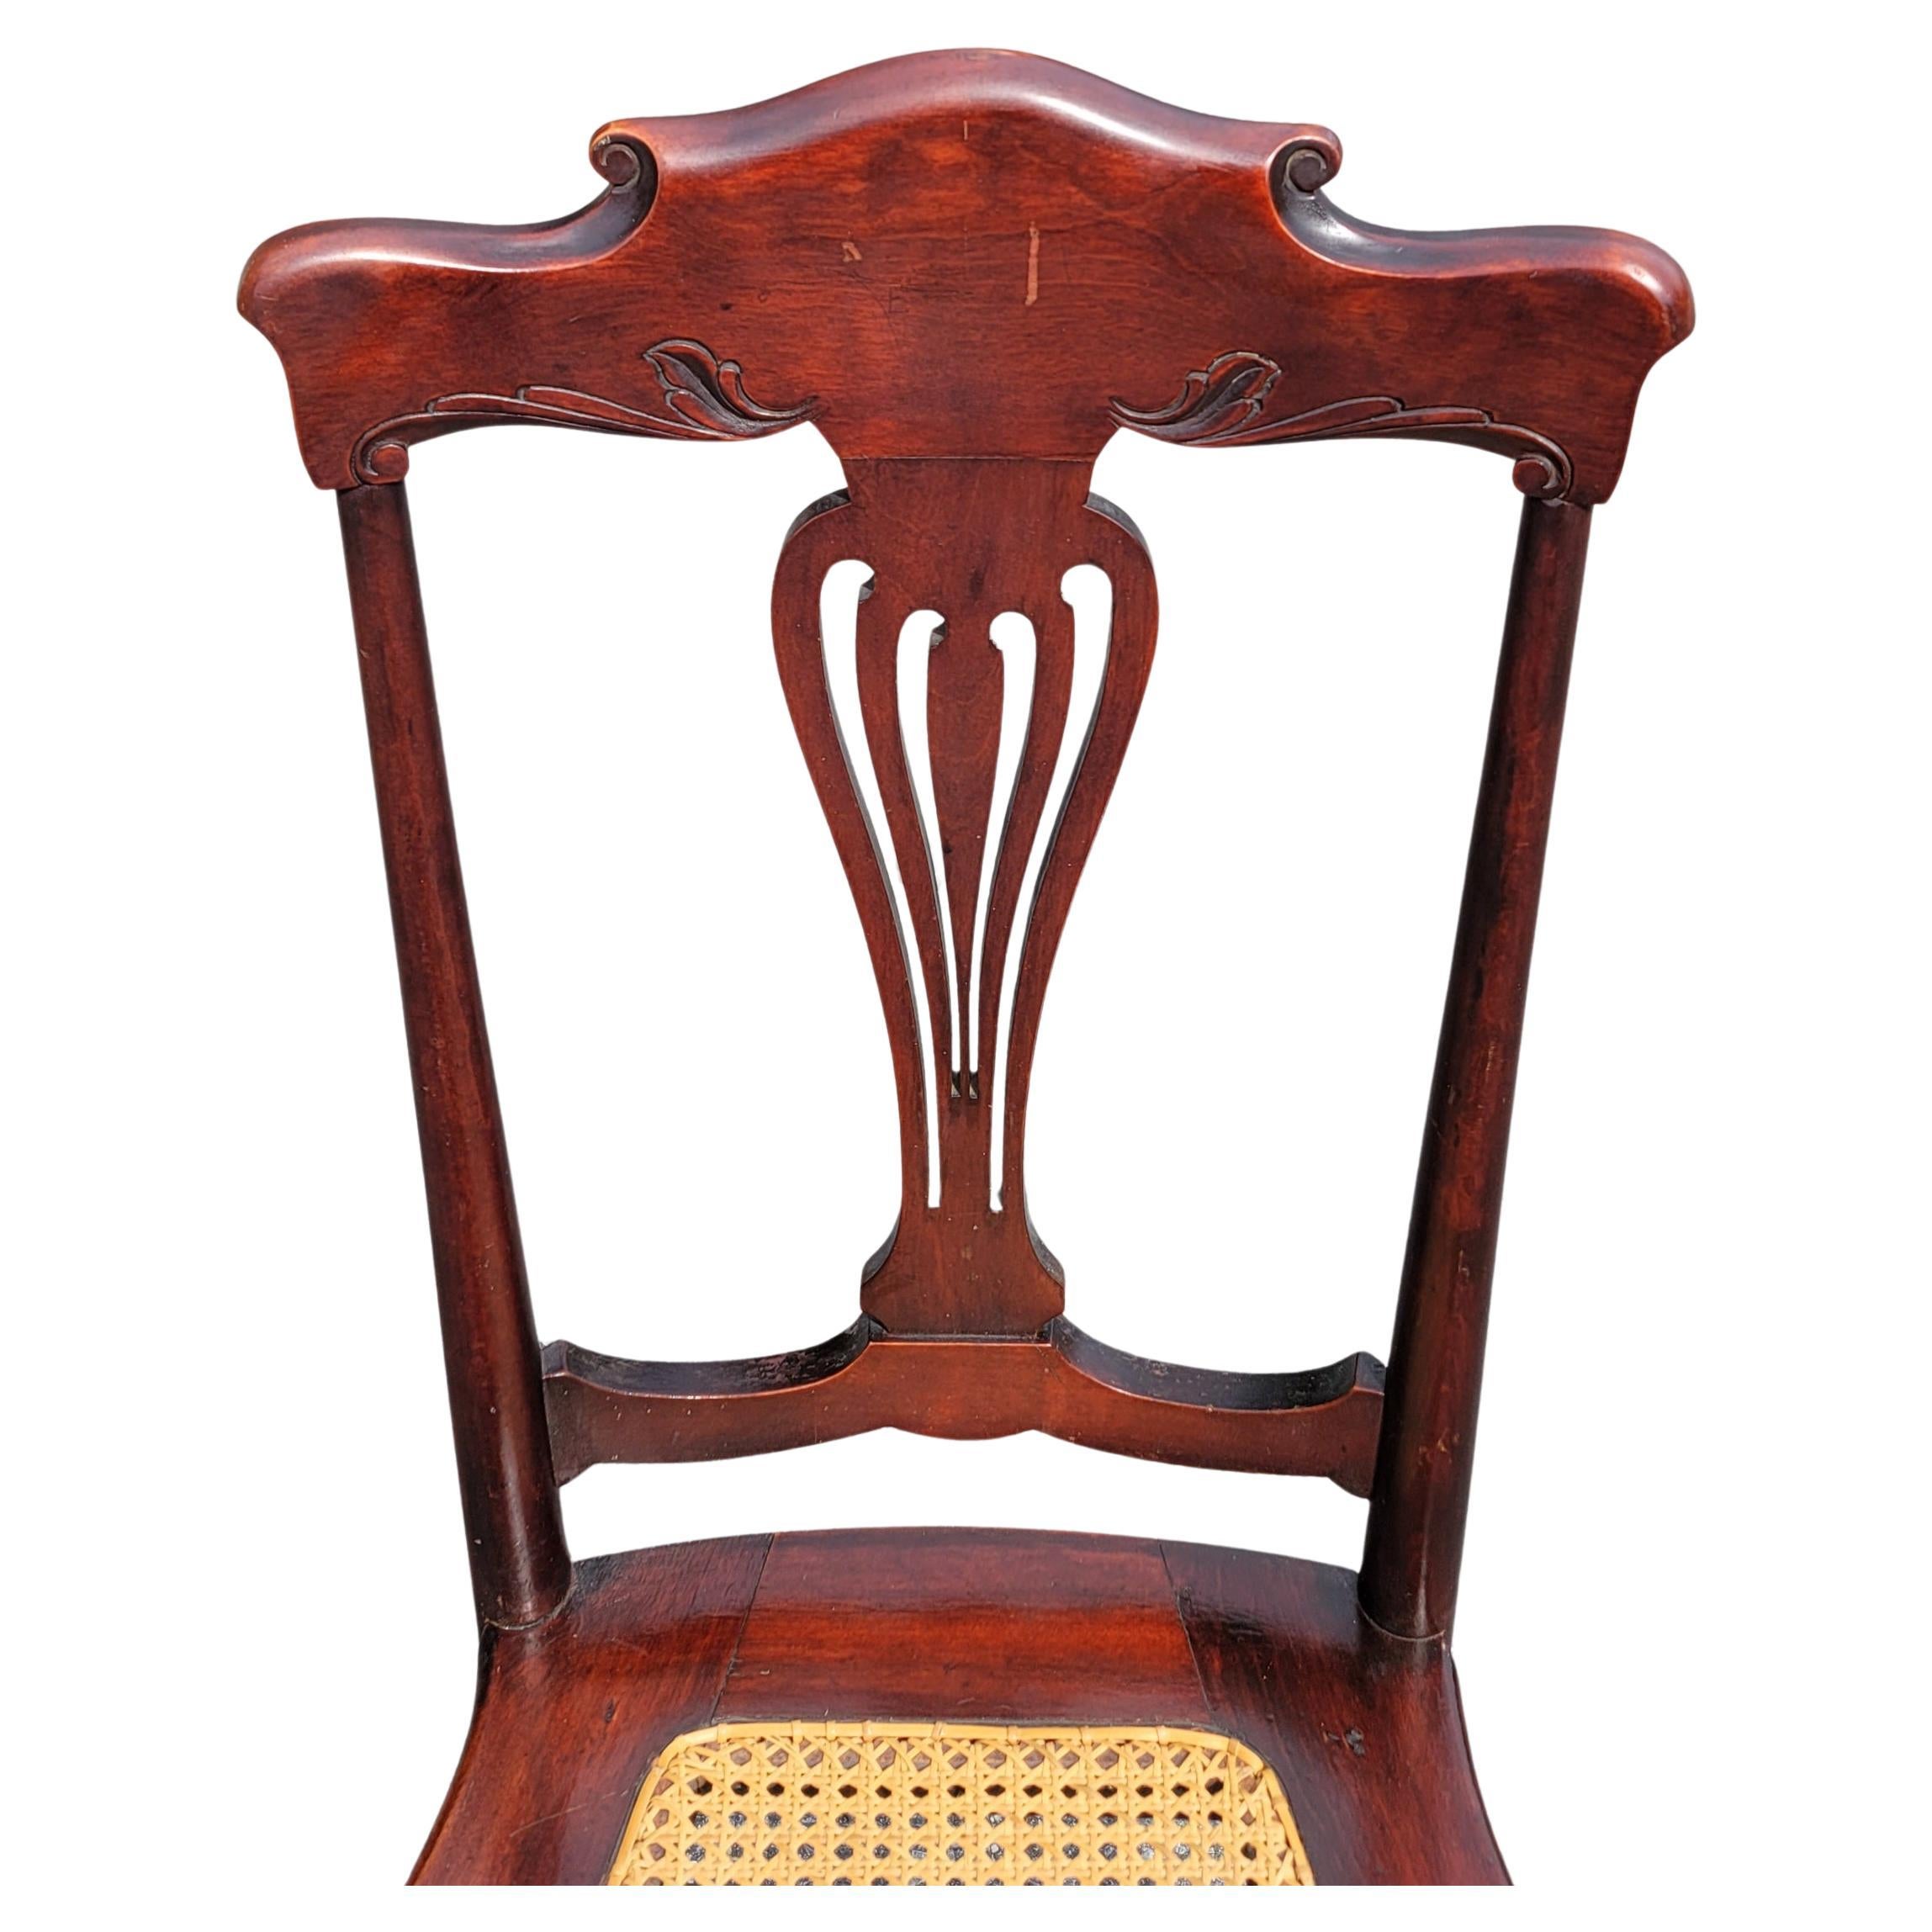 Refinished Early American Empire Mahogany and Cane Seat Chair For Sale 1